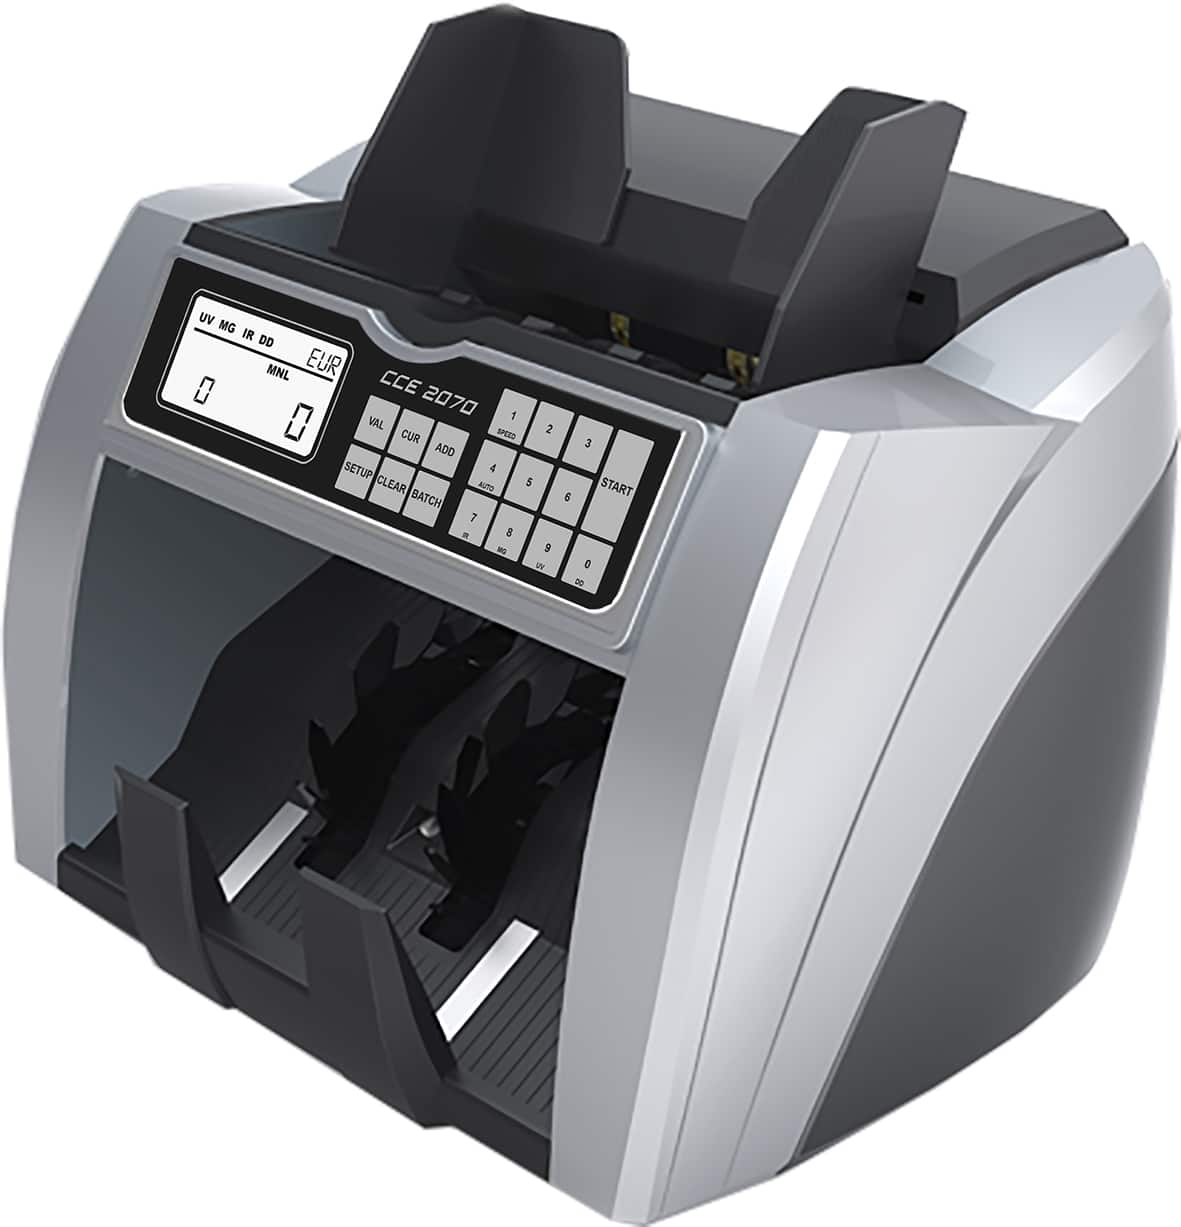 CCE 2070 Banknote Counter